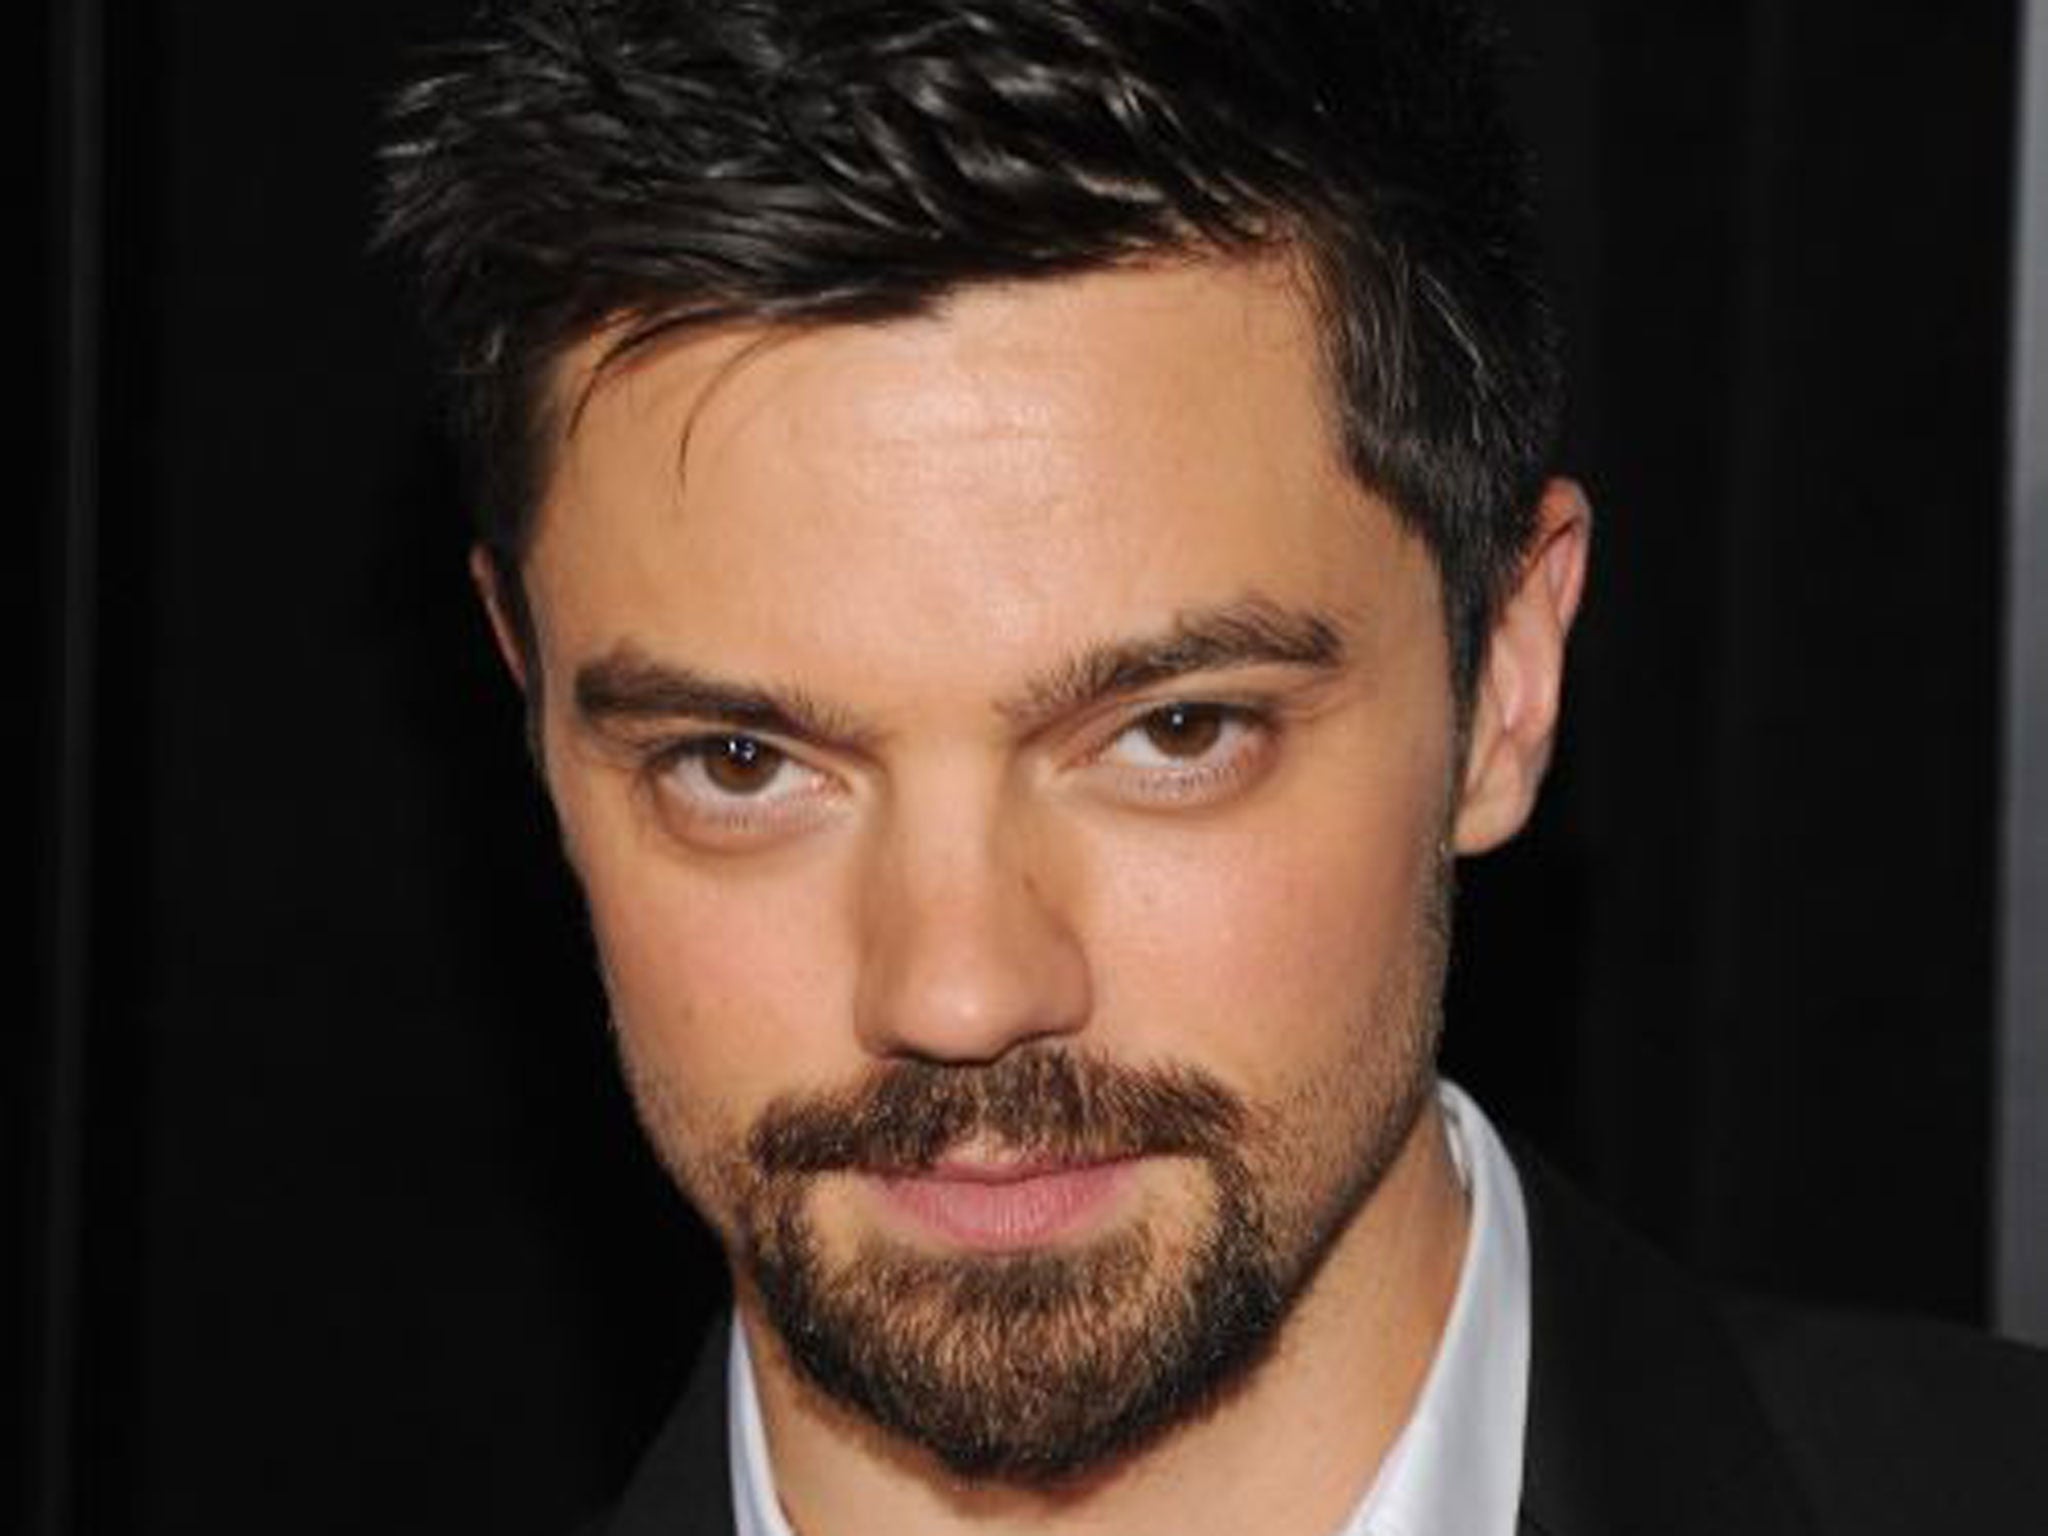 Man of the moment: Dominic Cooper